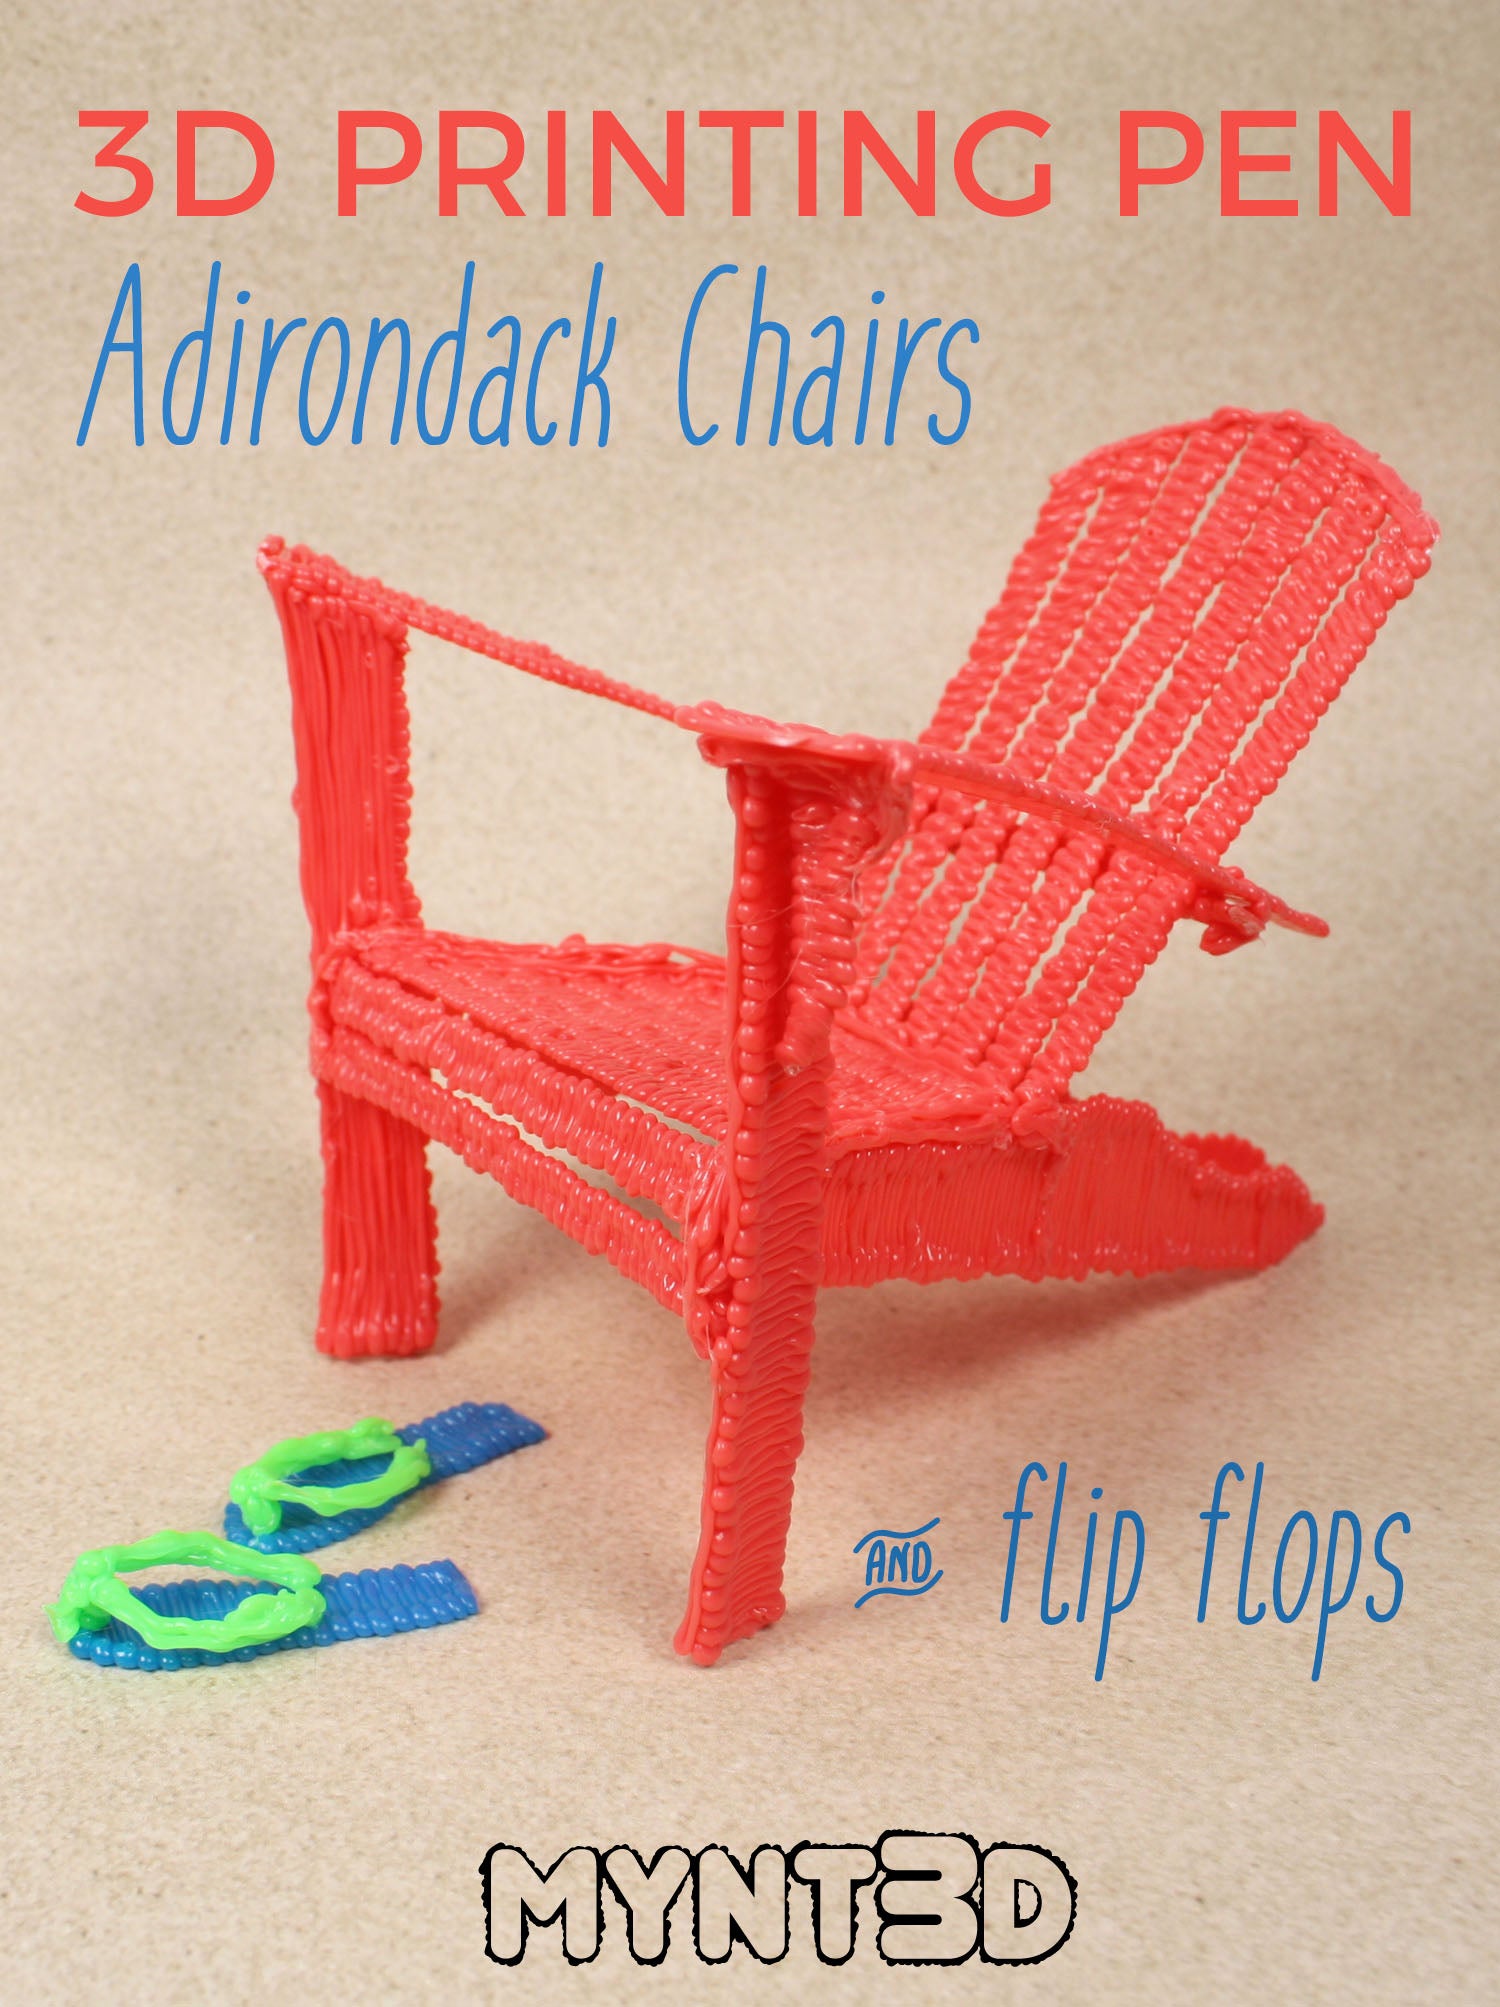 3D Pen Adirondack Chairs and Flip Flops